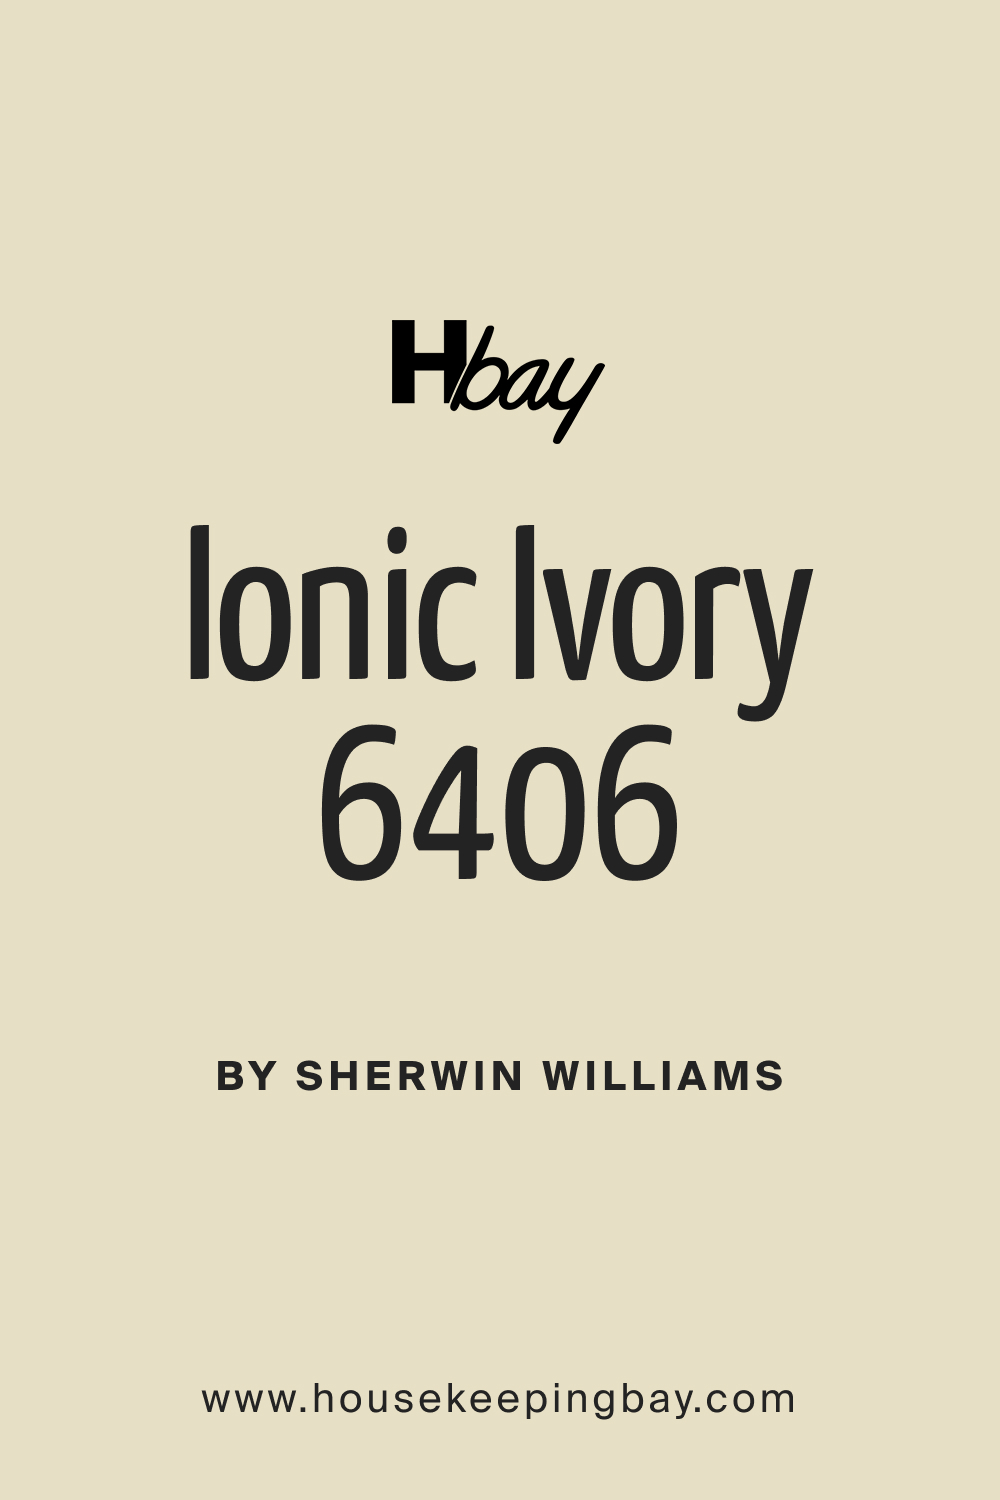 SW 6406 Ionic Ivory Paint Color by Sherwin Williams